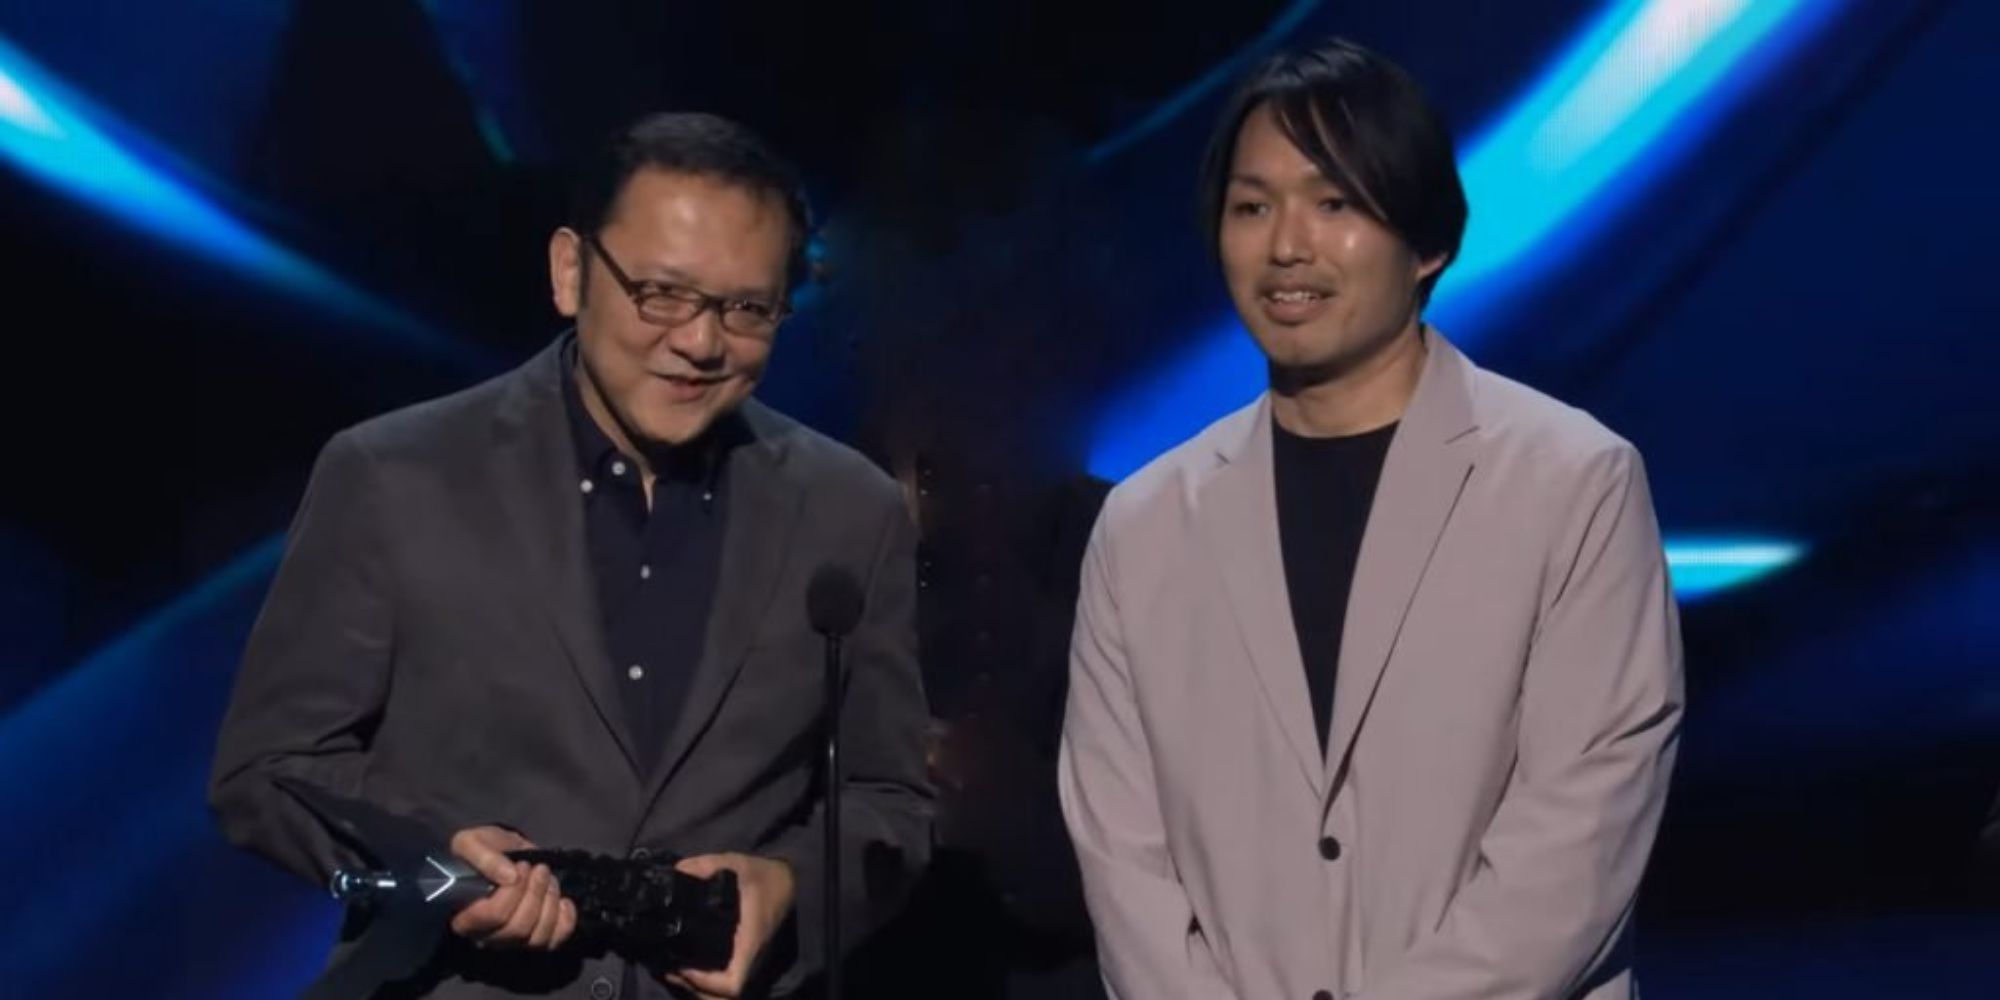 The Game Awards stage invader scrubbed from a photo.